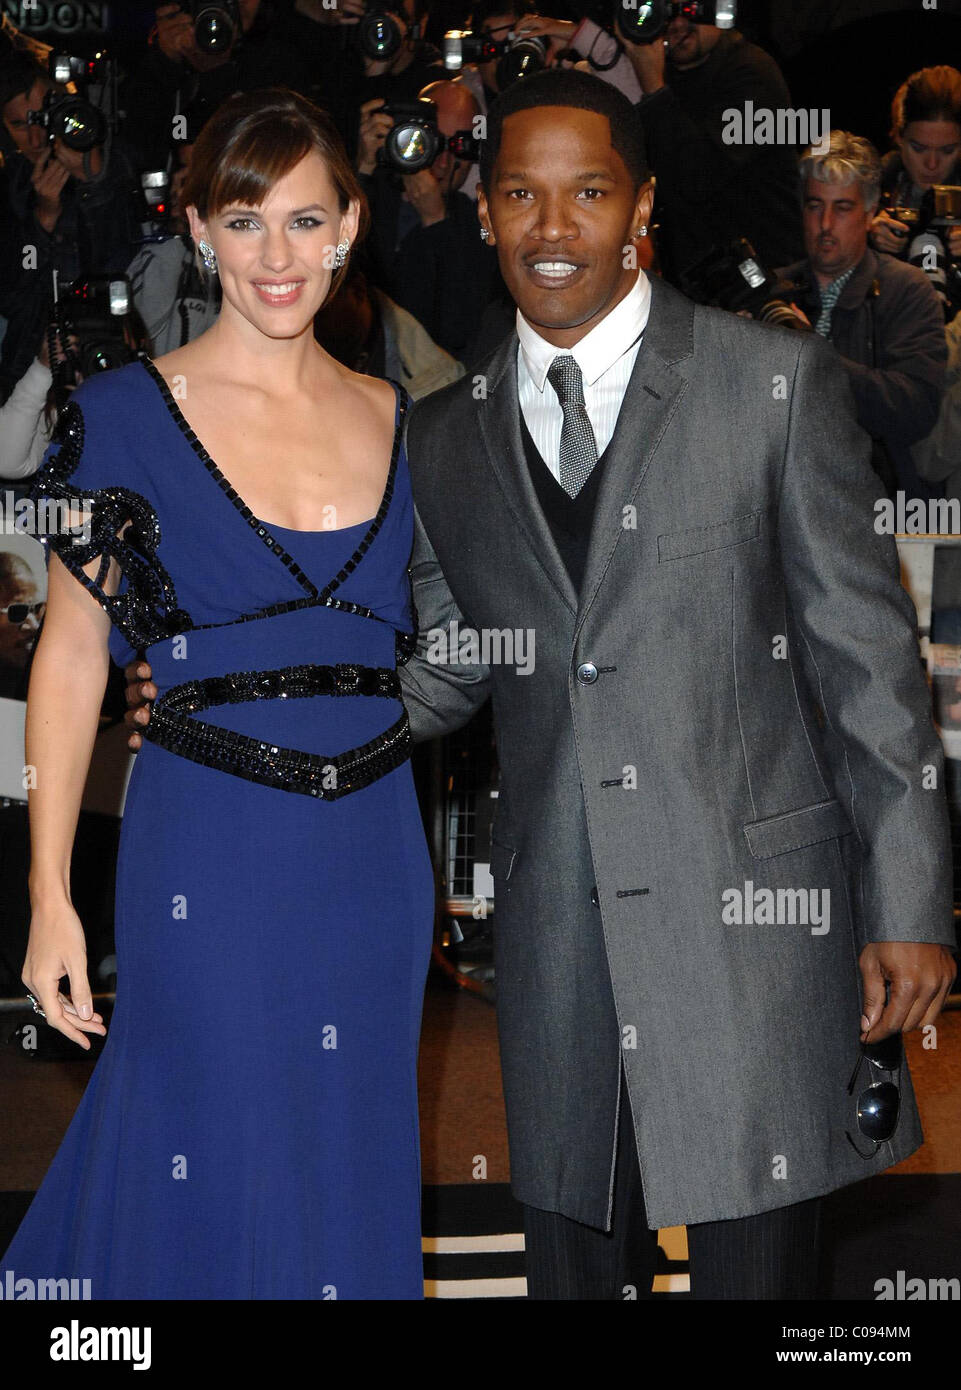 Jennifer Garner and Jamie Foxx UK Premiere of 'Kingdom' held at the Odeon  West End - Arrivals London, England - 04.10.07 Stock Photo - Alamy